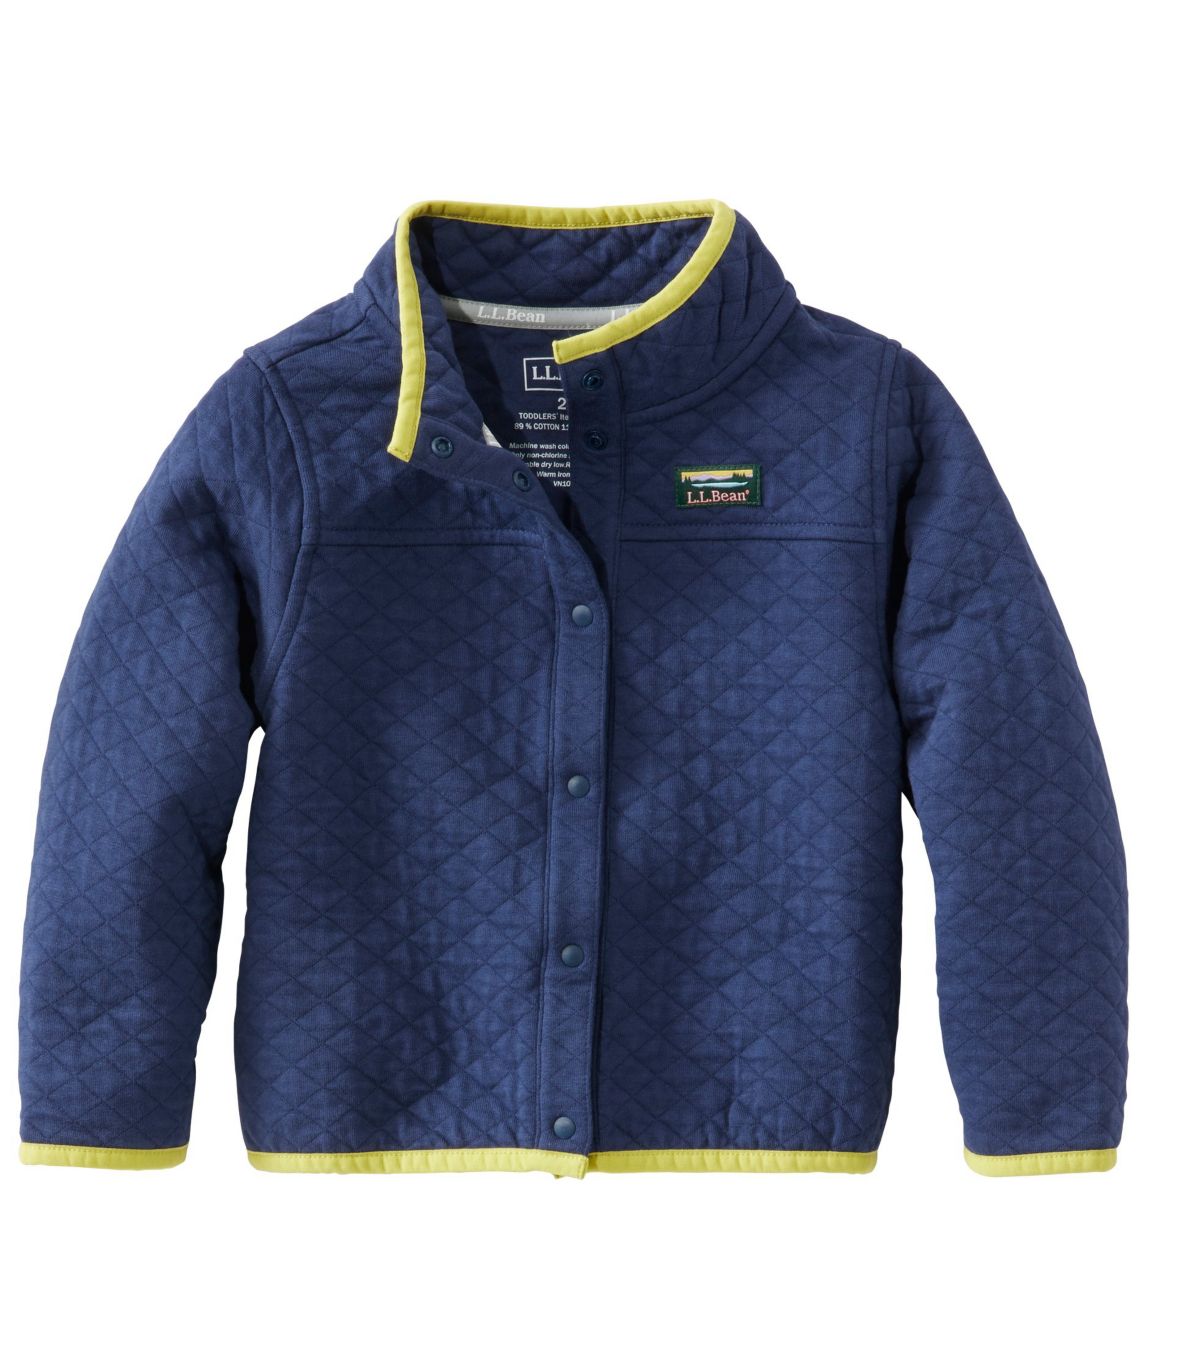 Infants' and Toddlers' Quilted Snap Sweatshirt